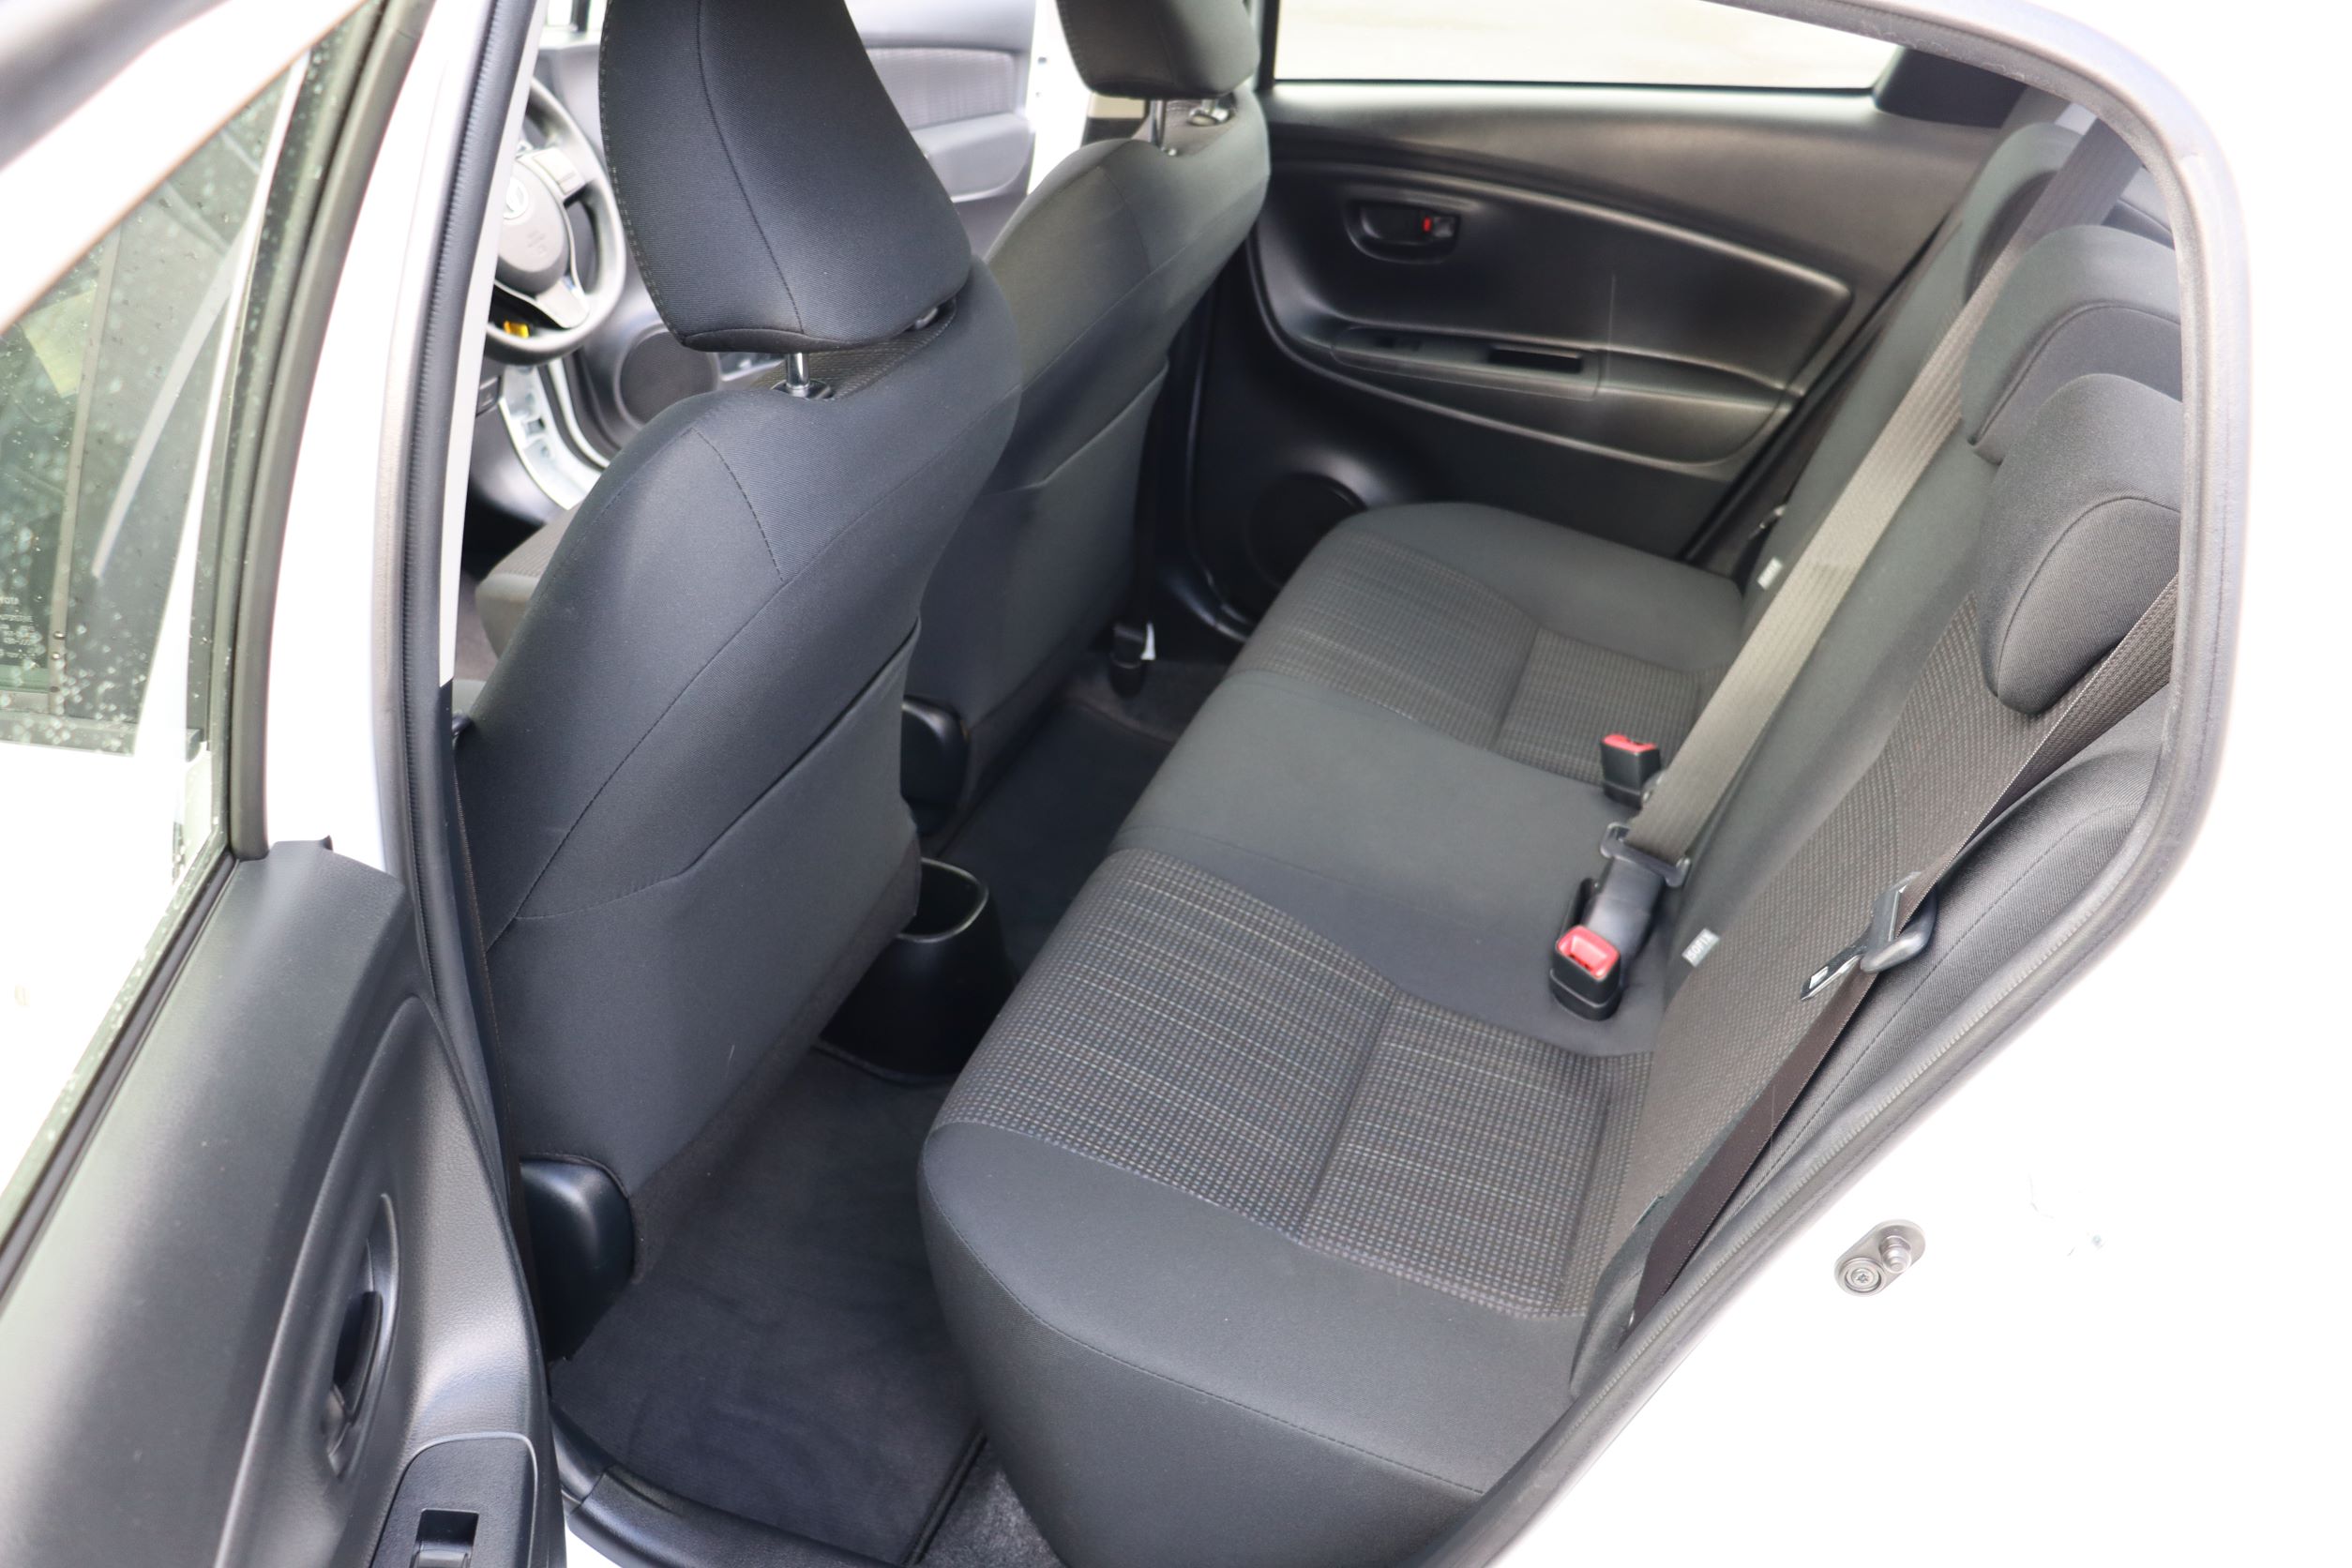 Toyota Yaris GX 2018 for sale in Auckland